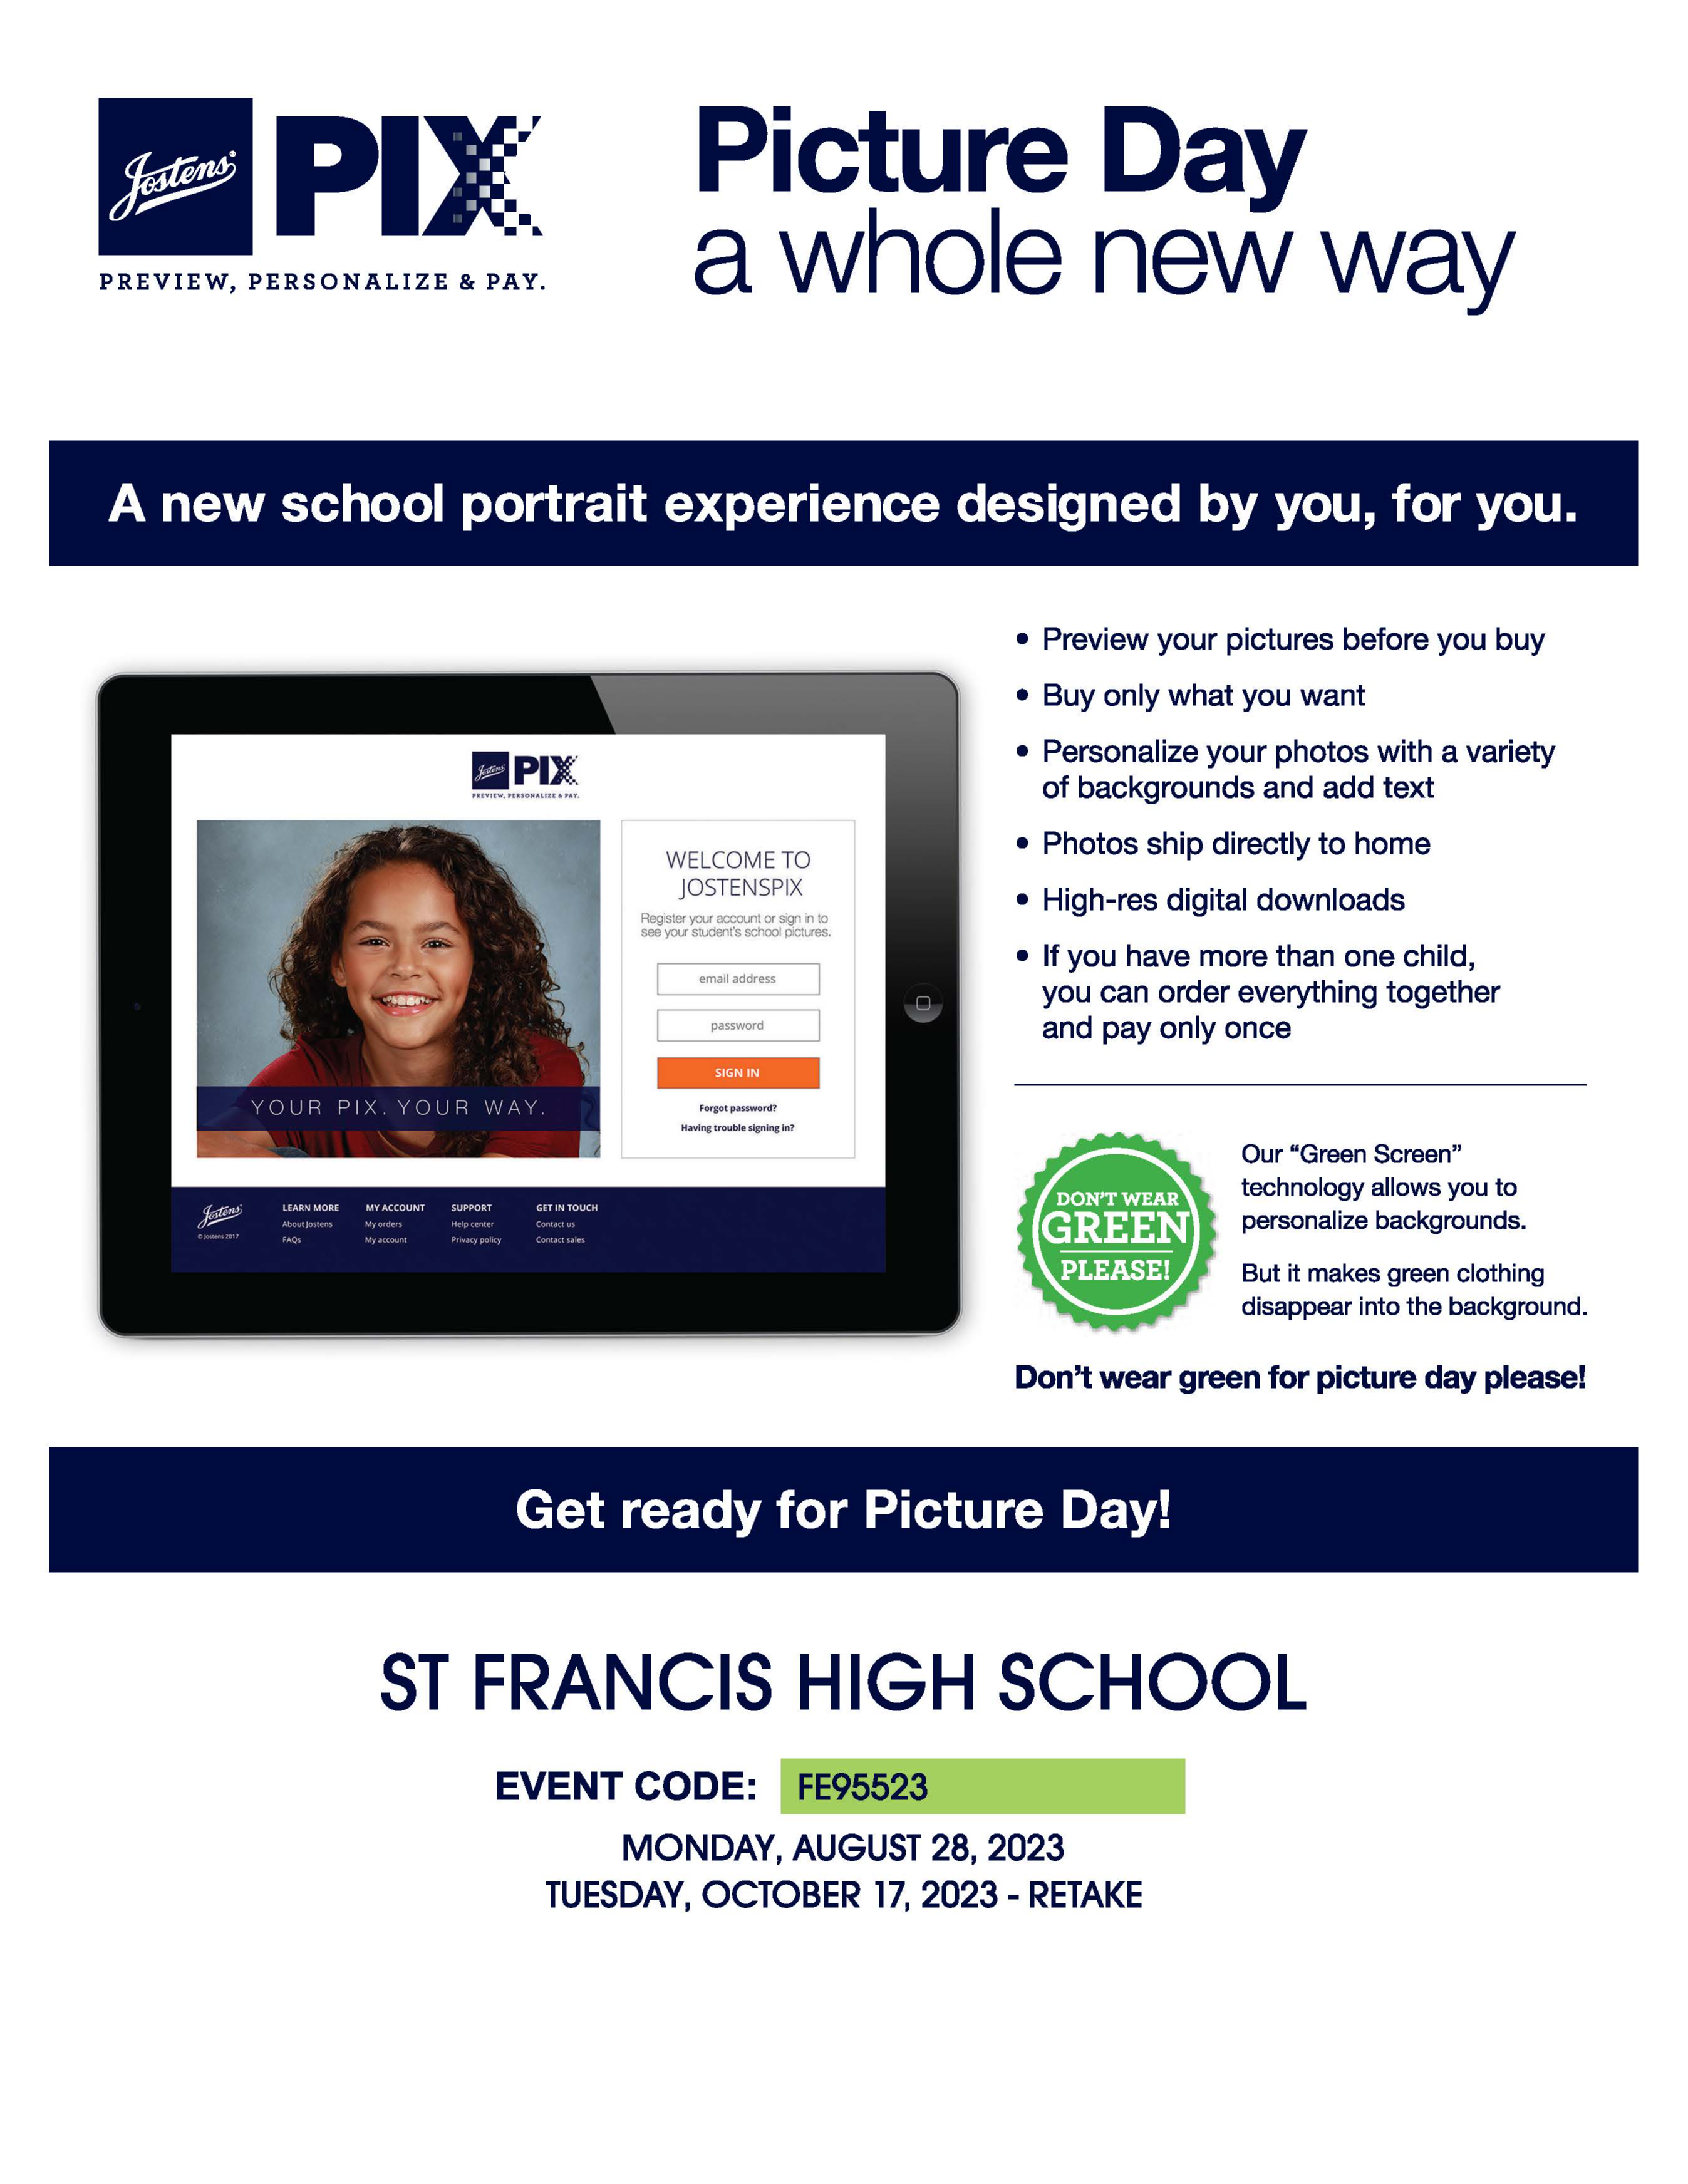 Jostens Photo Ad for St. Francis High School